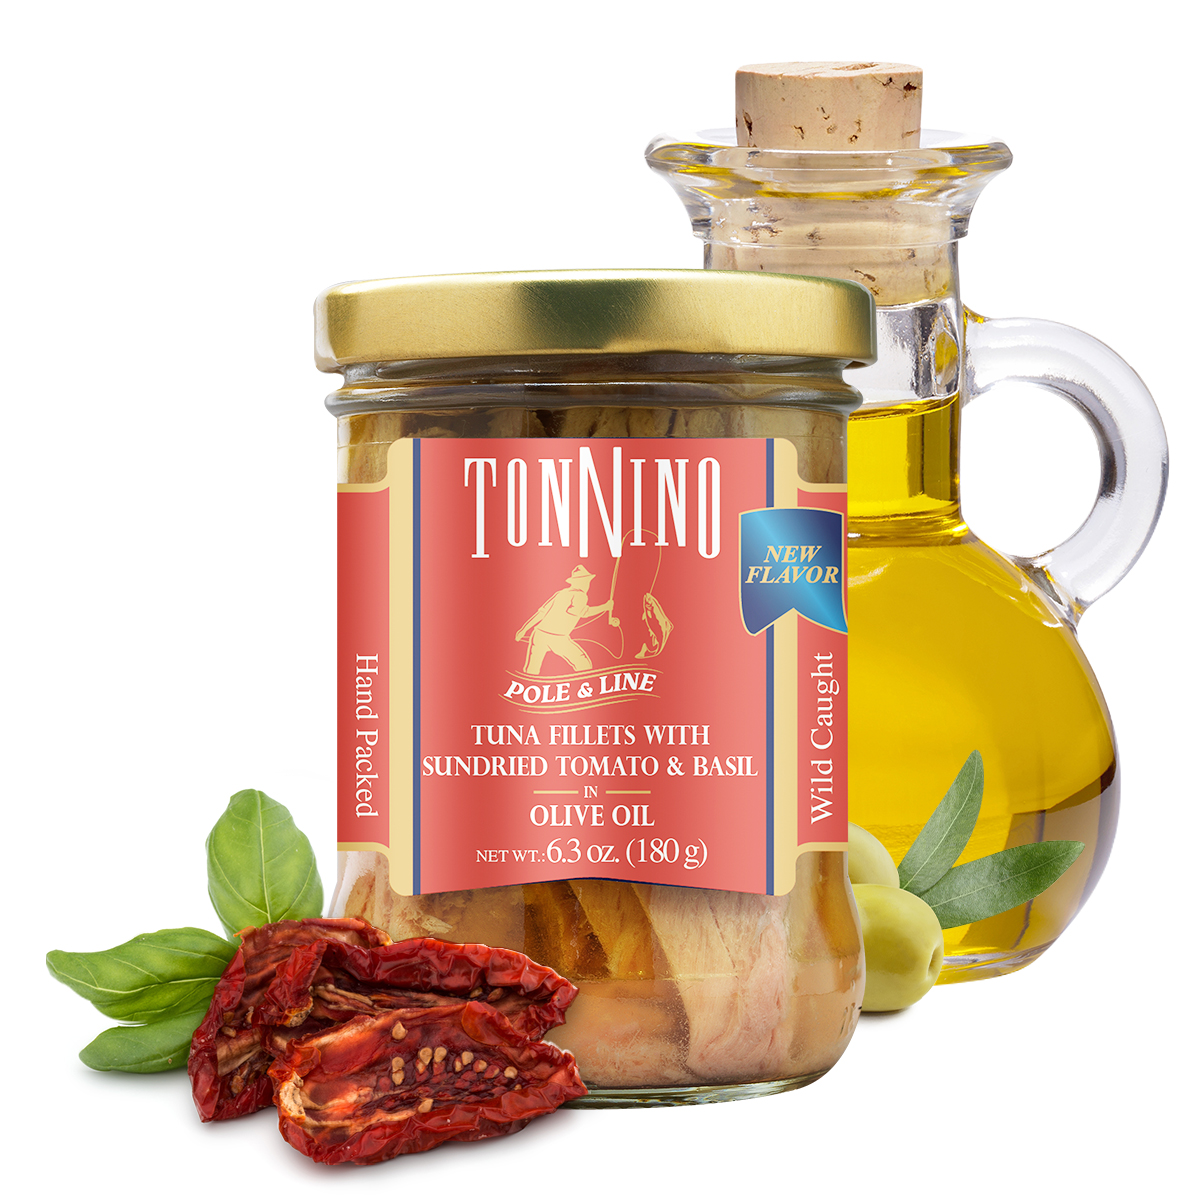 Tonnino Yellowfin Tuna Fillets With Sundried Tomato & Basil in Olive Oil, 6.3 oz